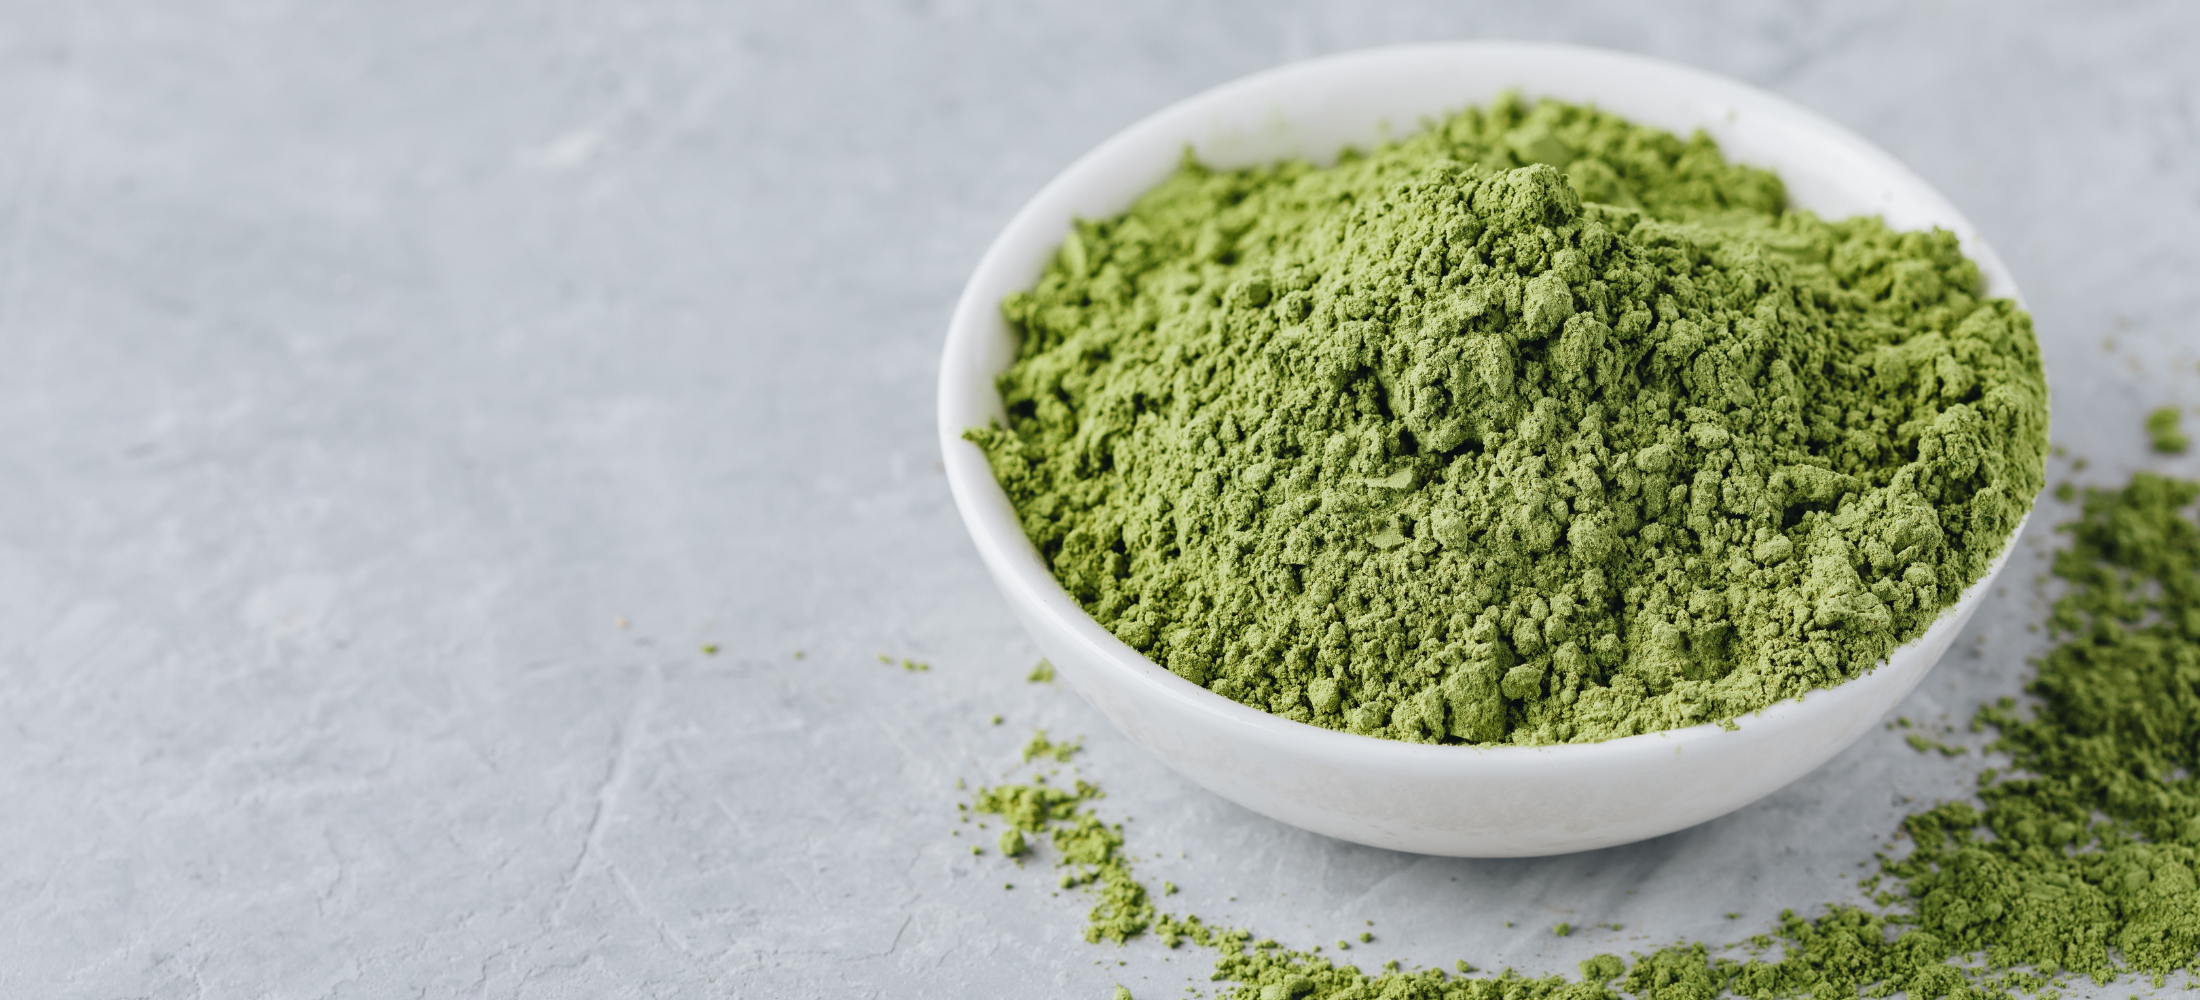 powdered matcha in a white bowl on a grey countertop